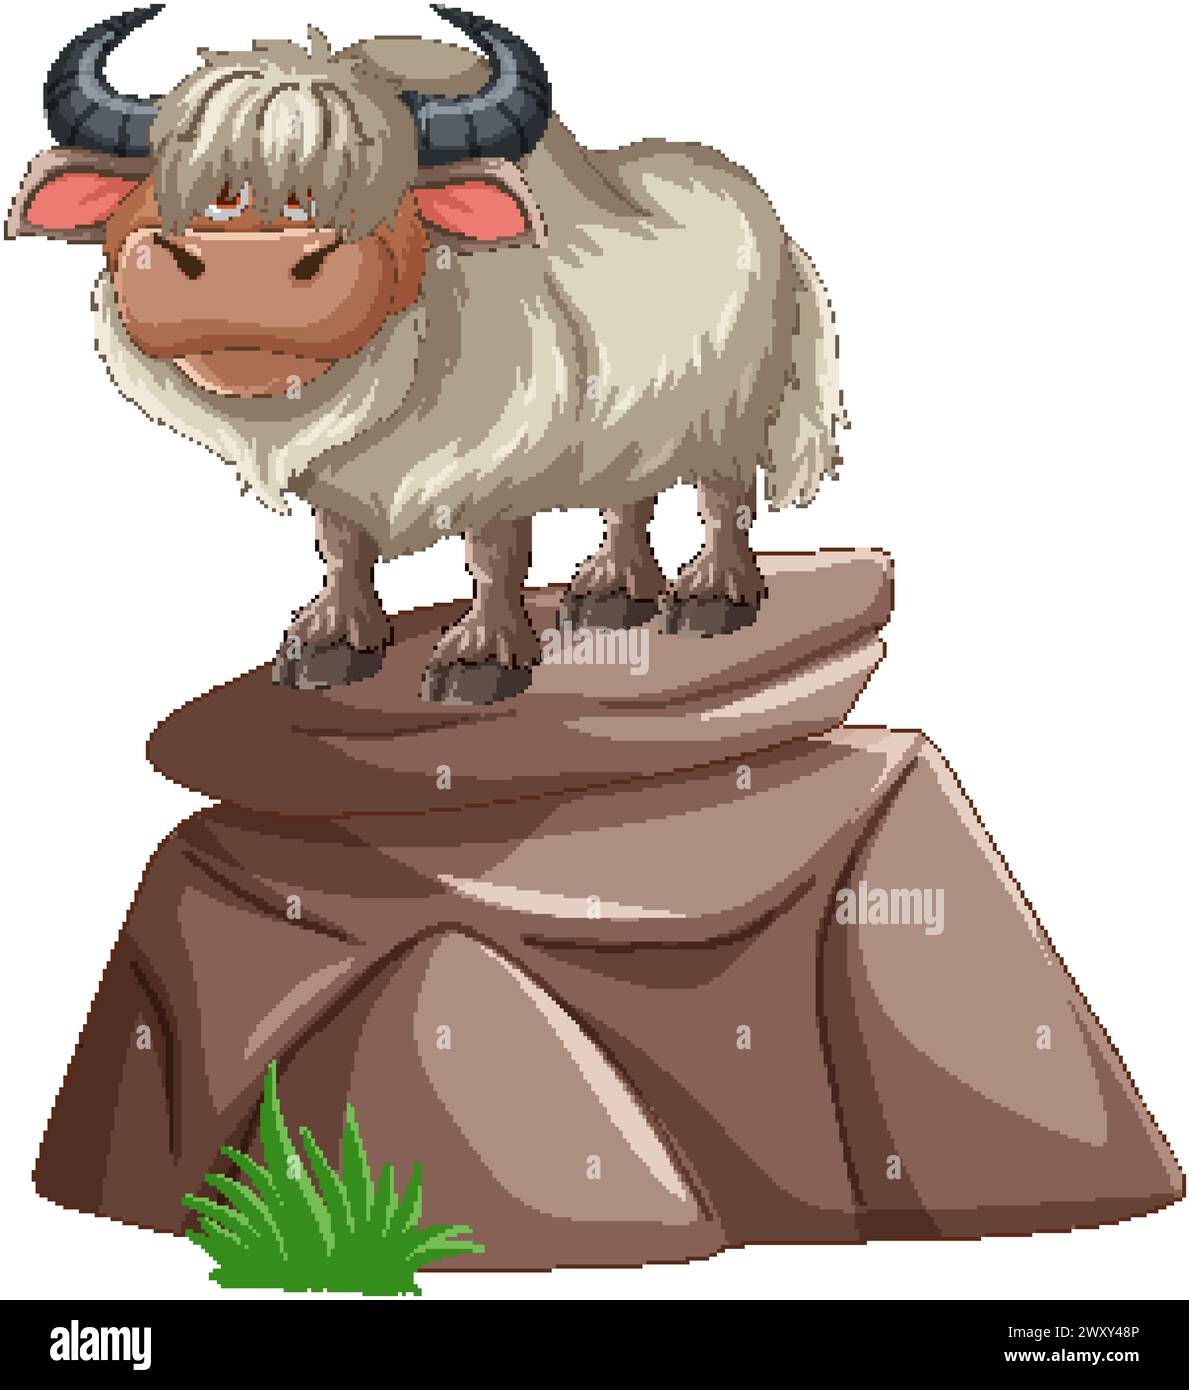 Cartoon yak standing proudly on a rocky outcrop Stock Vector